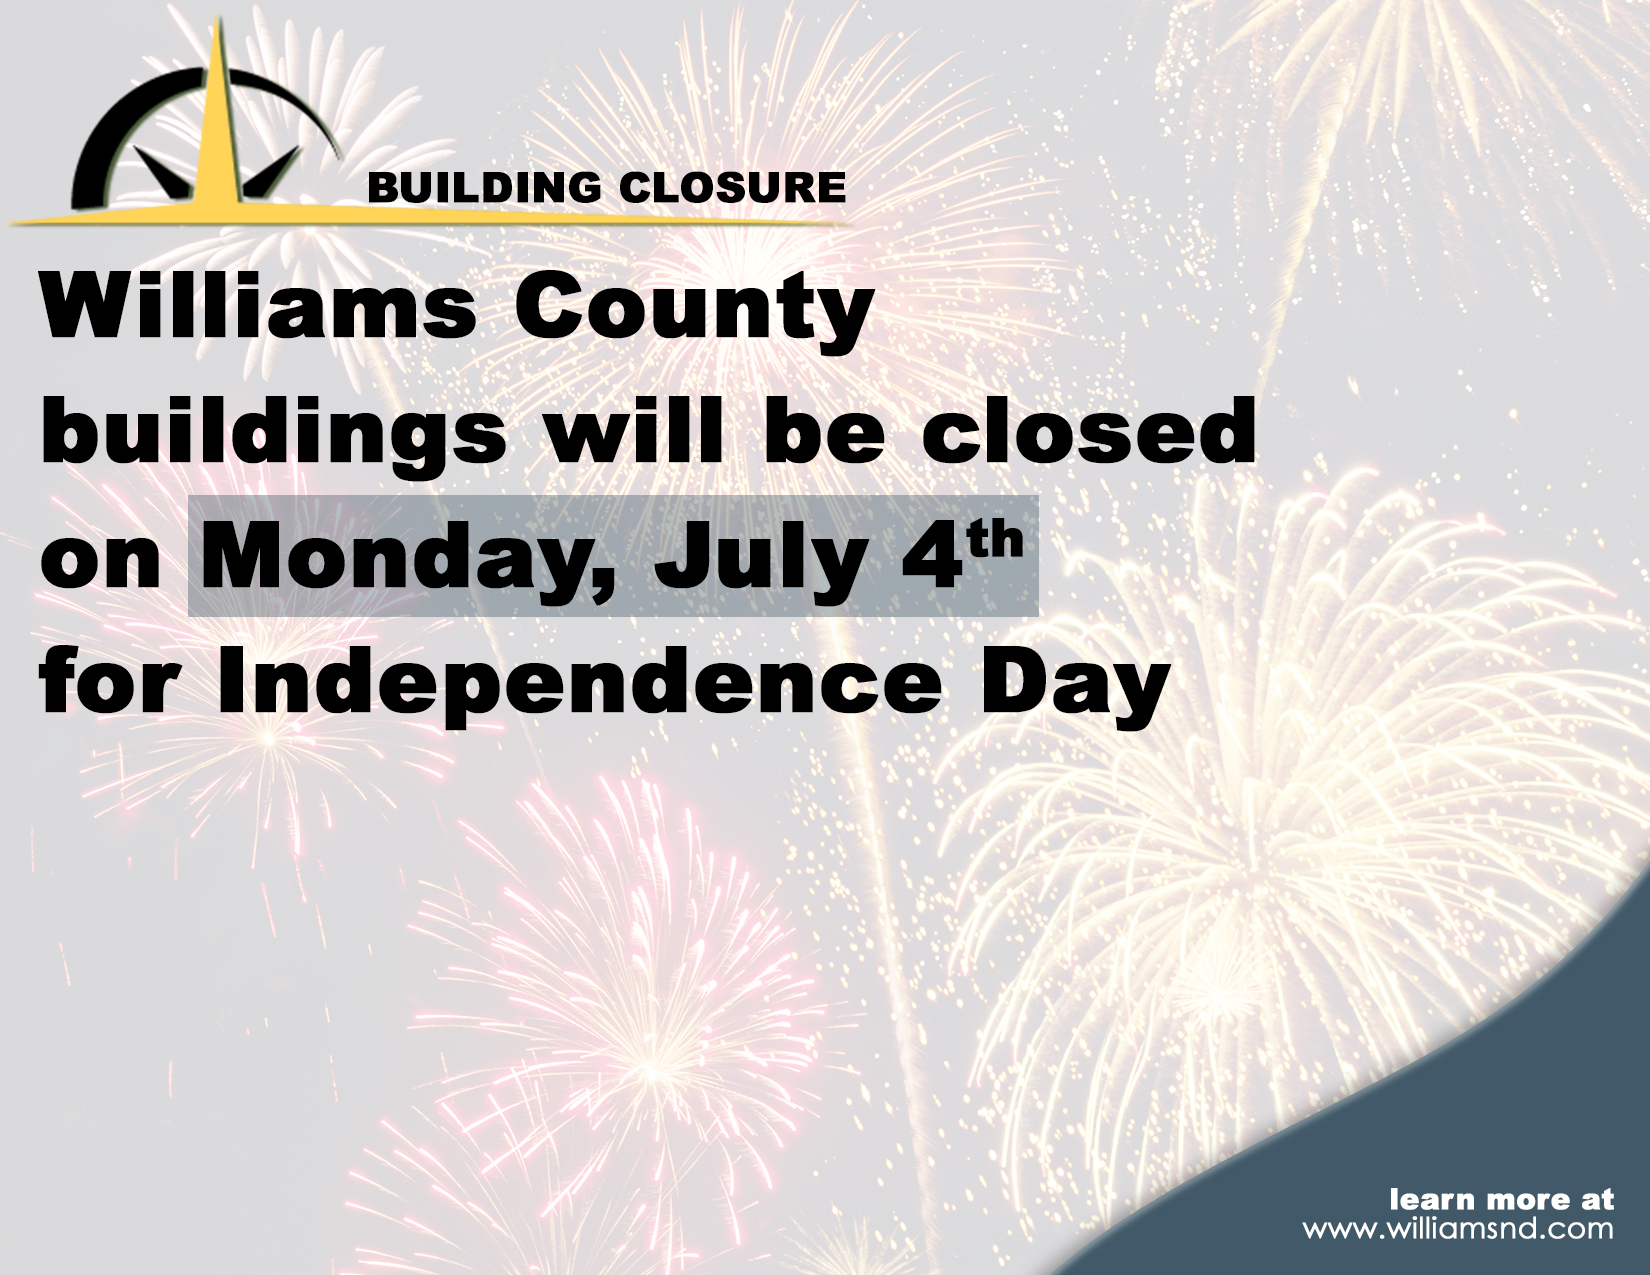 Image of fireworks with text Williams County buildings will be closed on Monday, July 4th for Independence Day